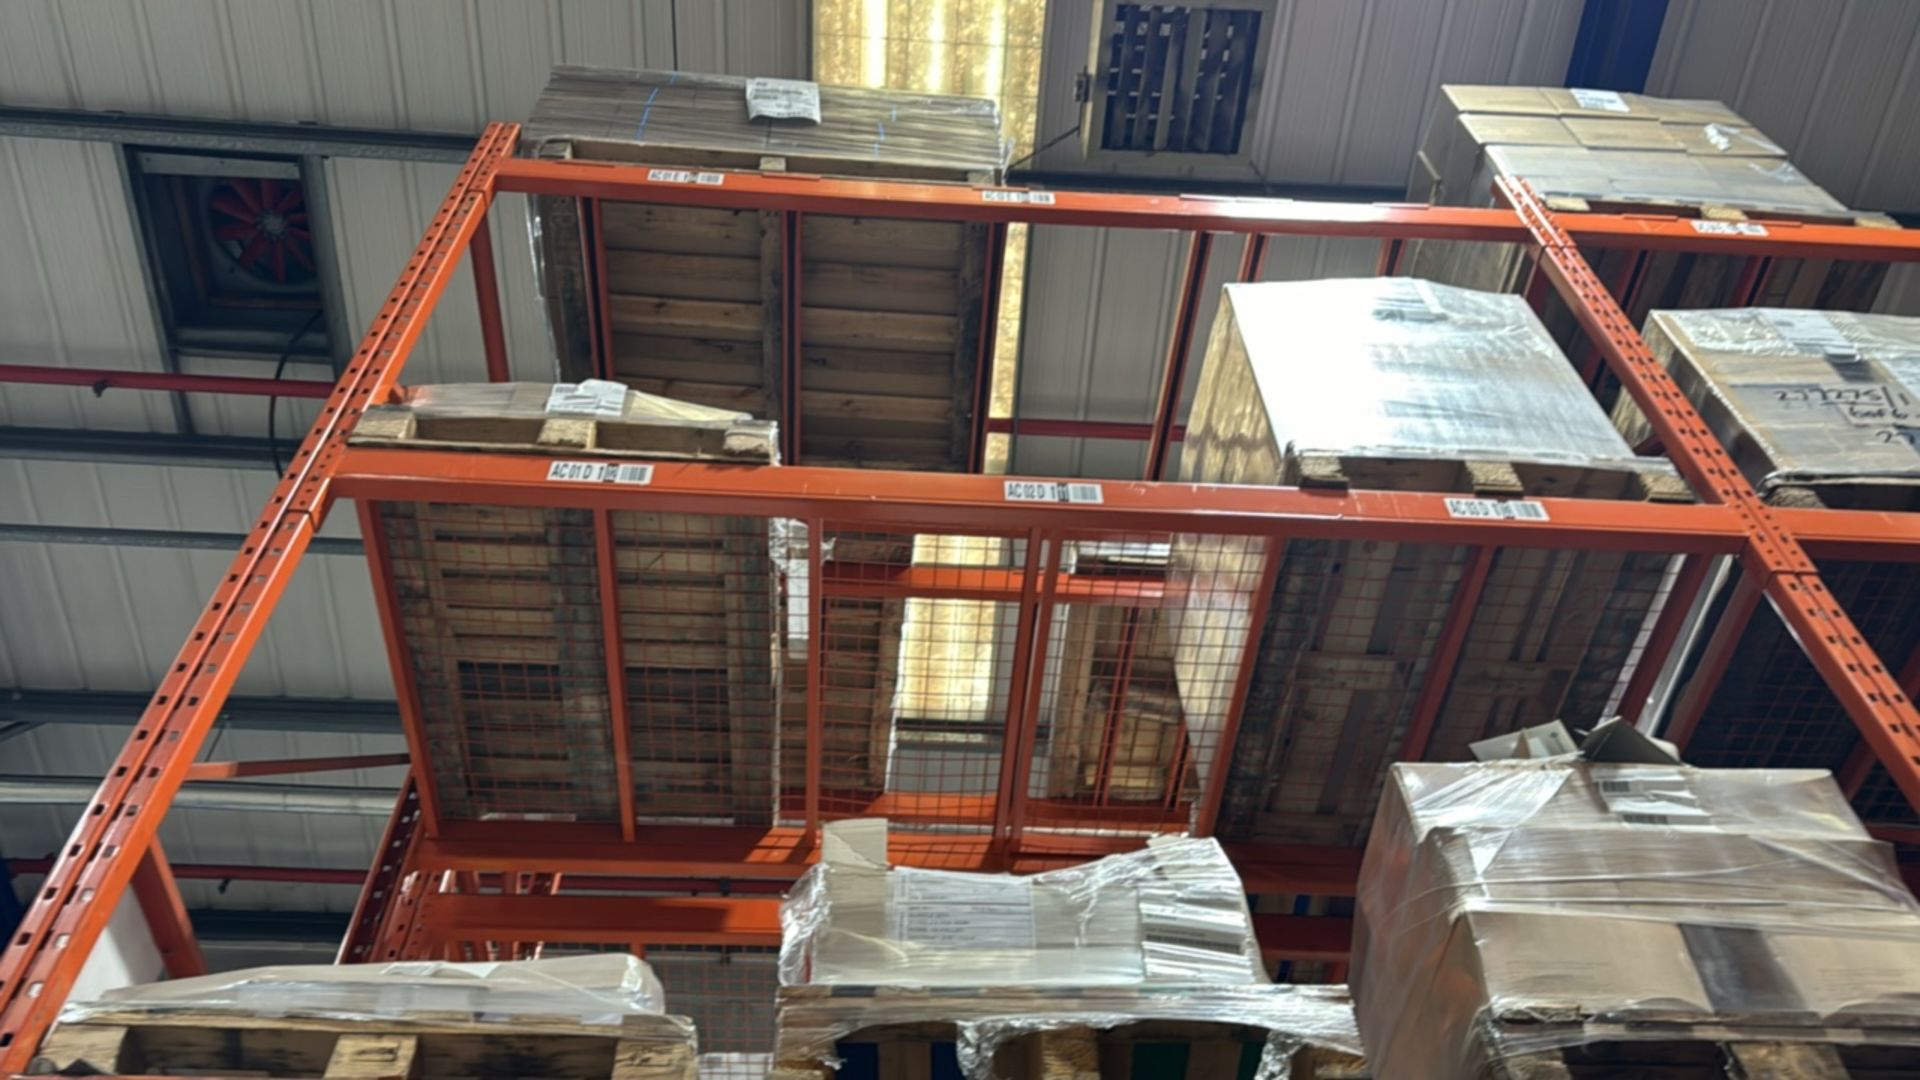 24 Bays Of Boltless Pallet Racking - Image 7 of 8